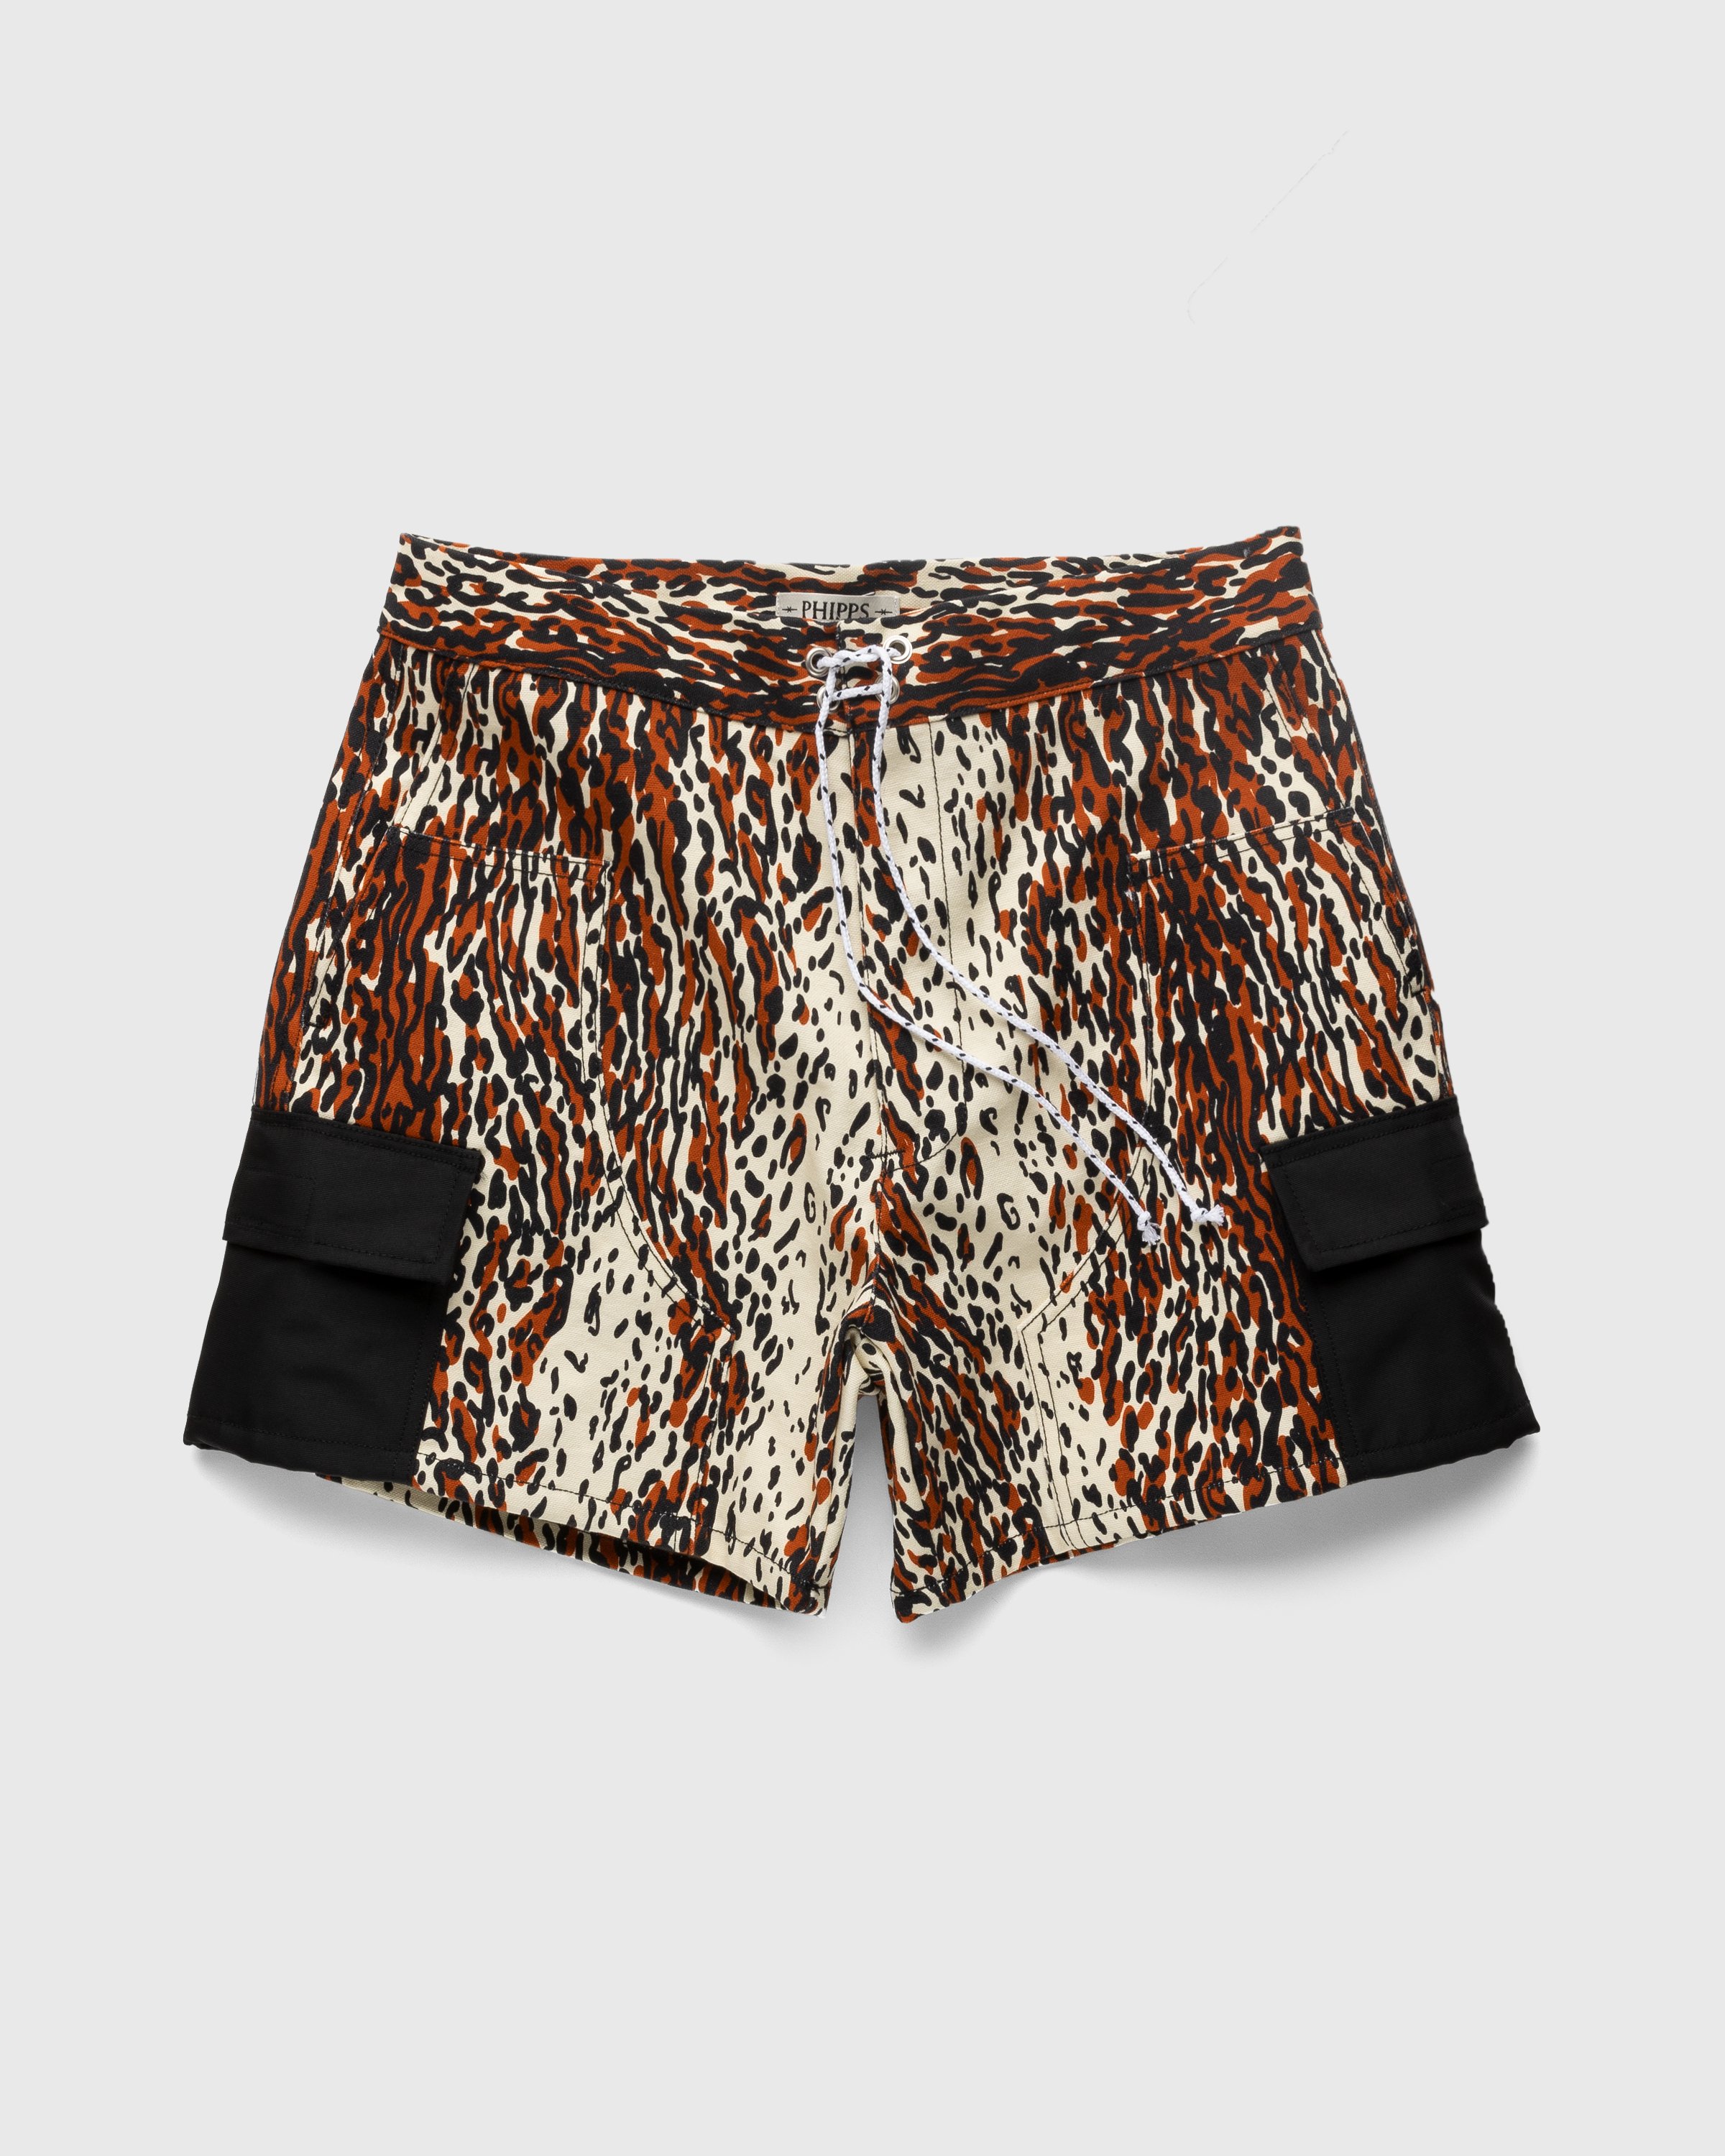 Phipps - Action Shorts Printed Canvas Leopard - Clothing - Brown - Image 1